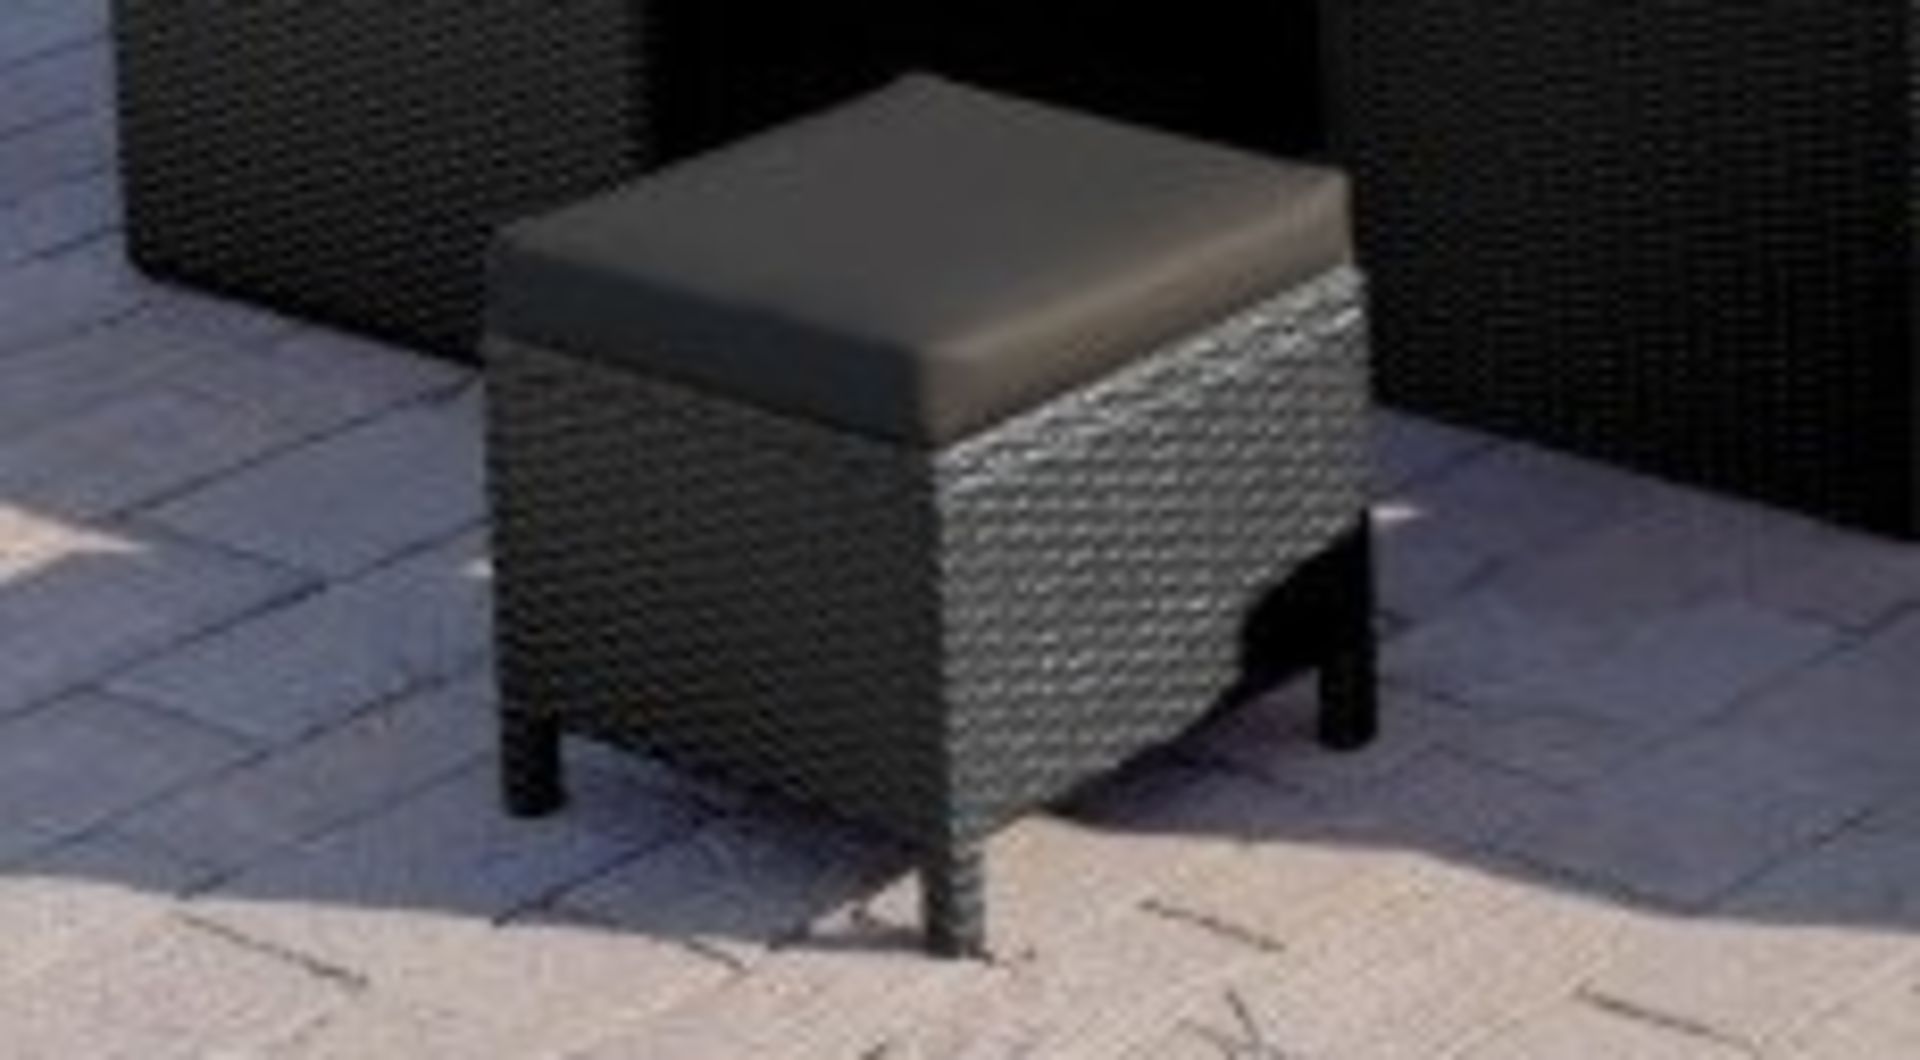 1 GRADE A BOXED ABREO GRAND MONACO FOOT STOOL IN GREY AND BLACK / RRP £80.00 (VIEWING HIGHLY